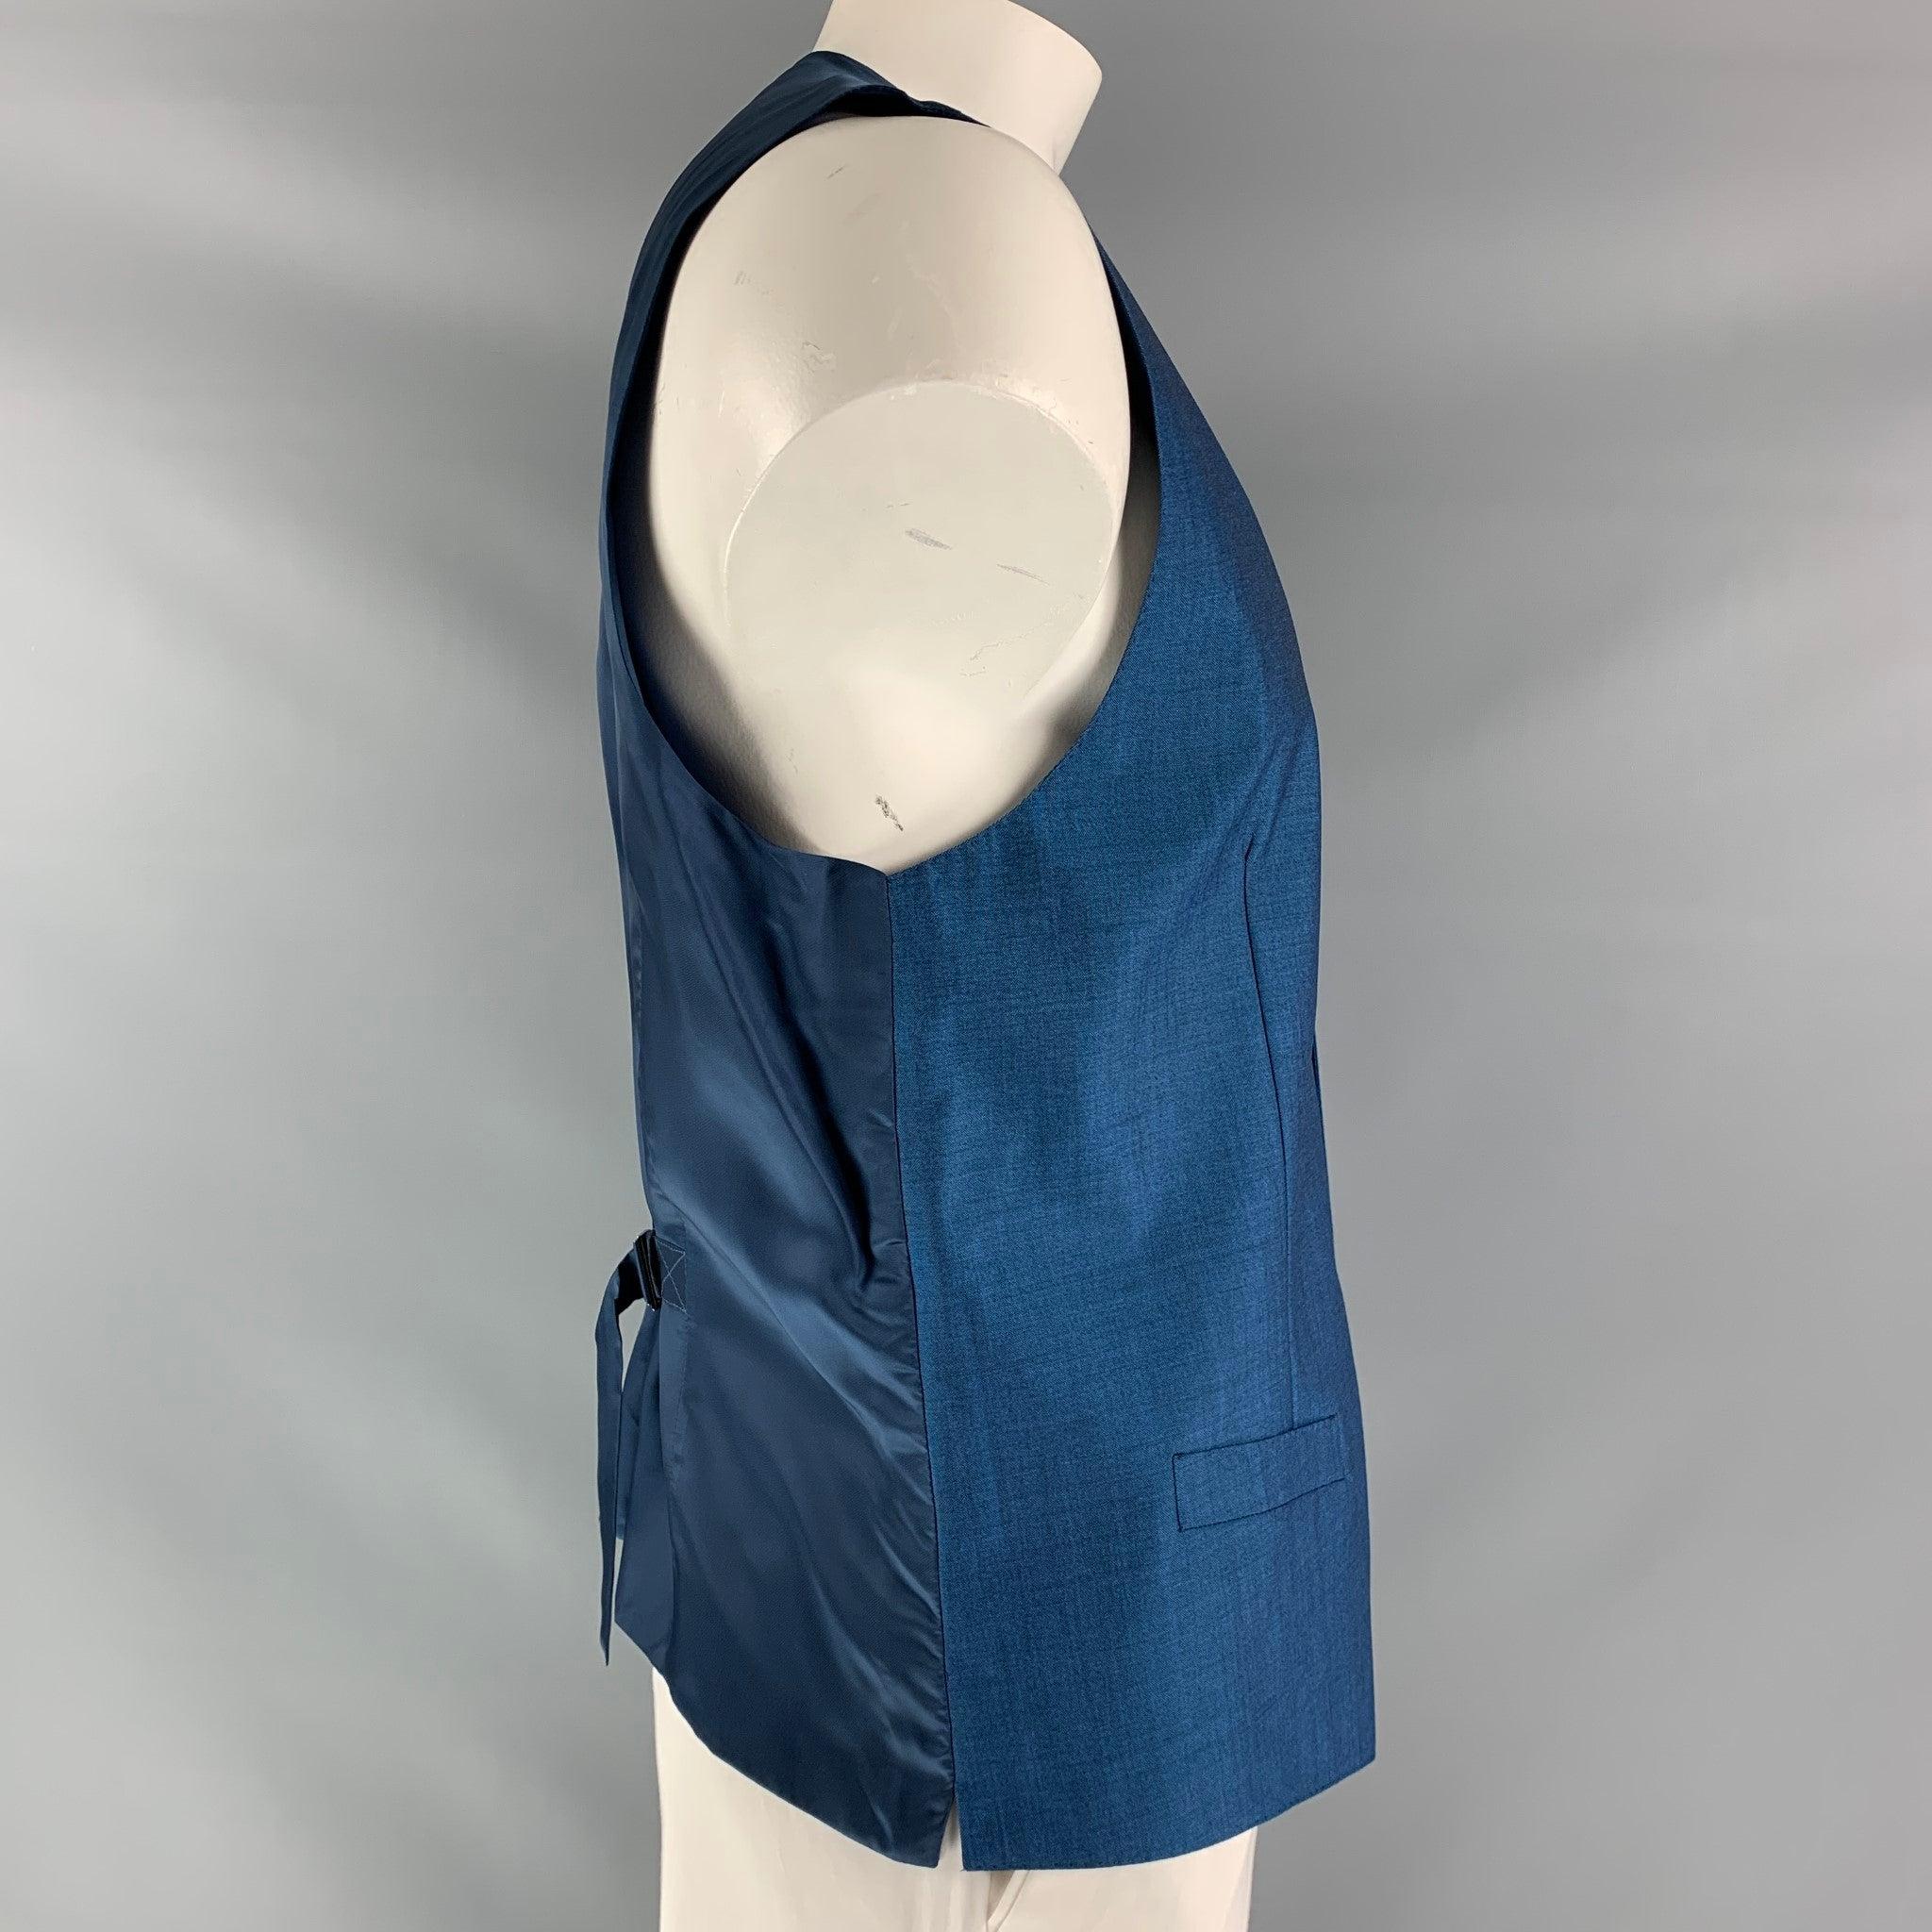 DOLCE & GABBANA dress vest comes in blue mohair and wool fabric, full lined featuring V-neck, welt pockets, five buttons down closure, blue viscose fabric at back and adjustable sliding belt. Made in Italy.Excellent Pre-Owned Condition.  

Marked: 